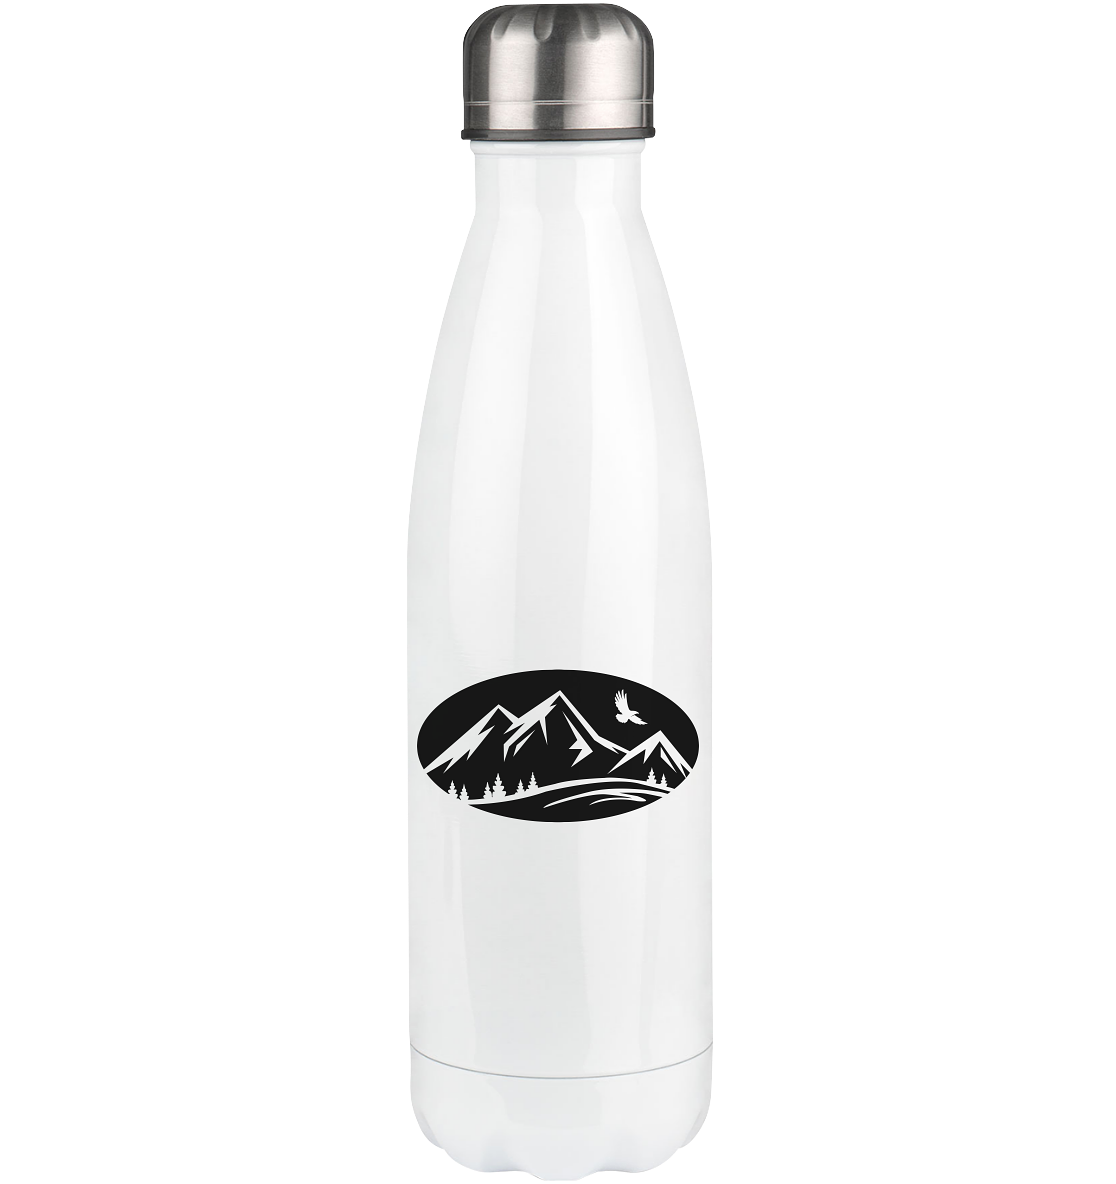 Semicircle and Mountain - Edelstahl Thermosflasche berge 500ml